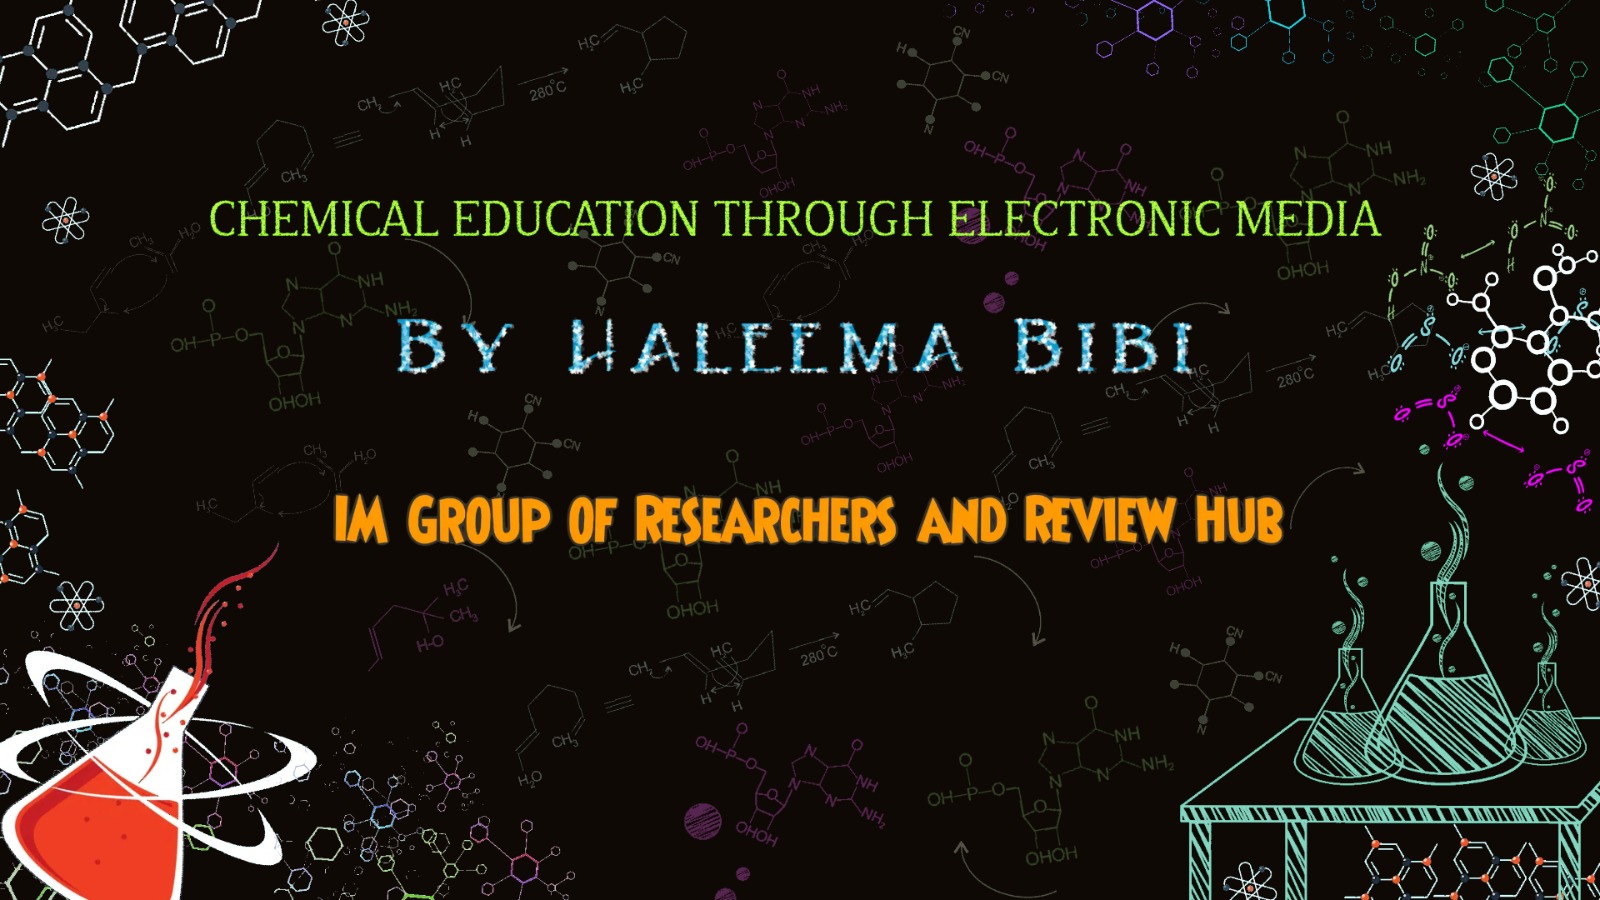 Advancing Chemical Education through Electronic Media